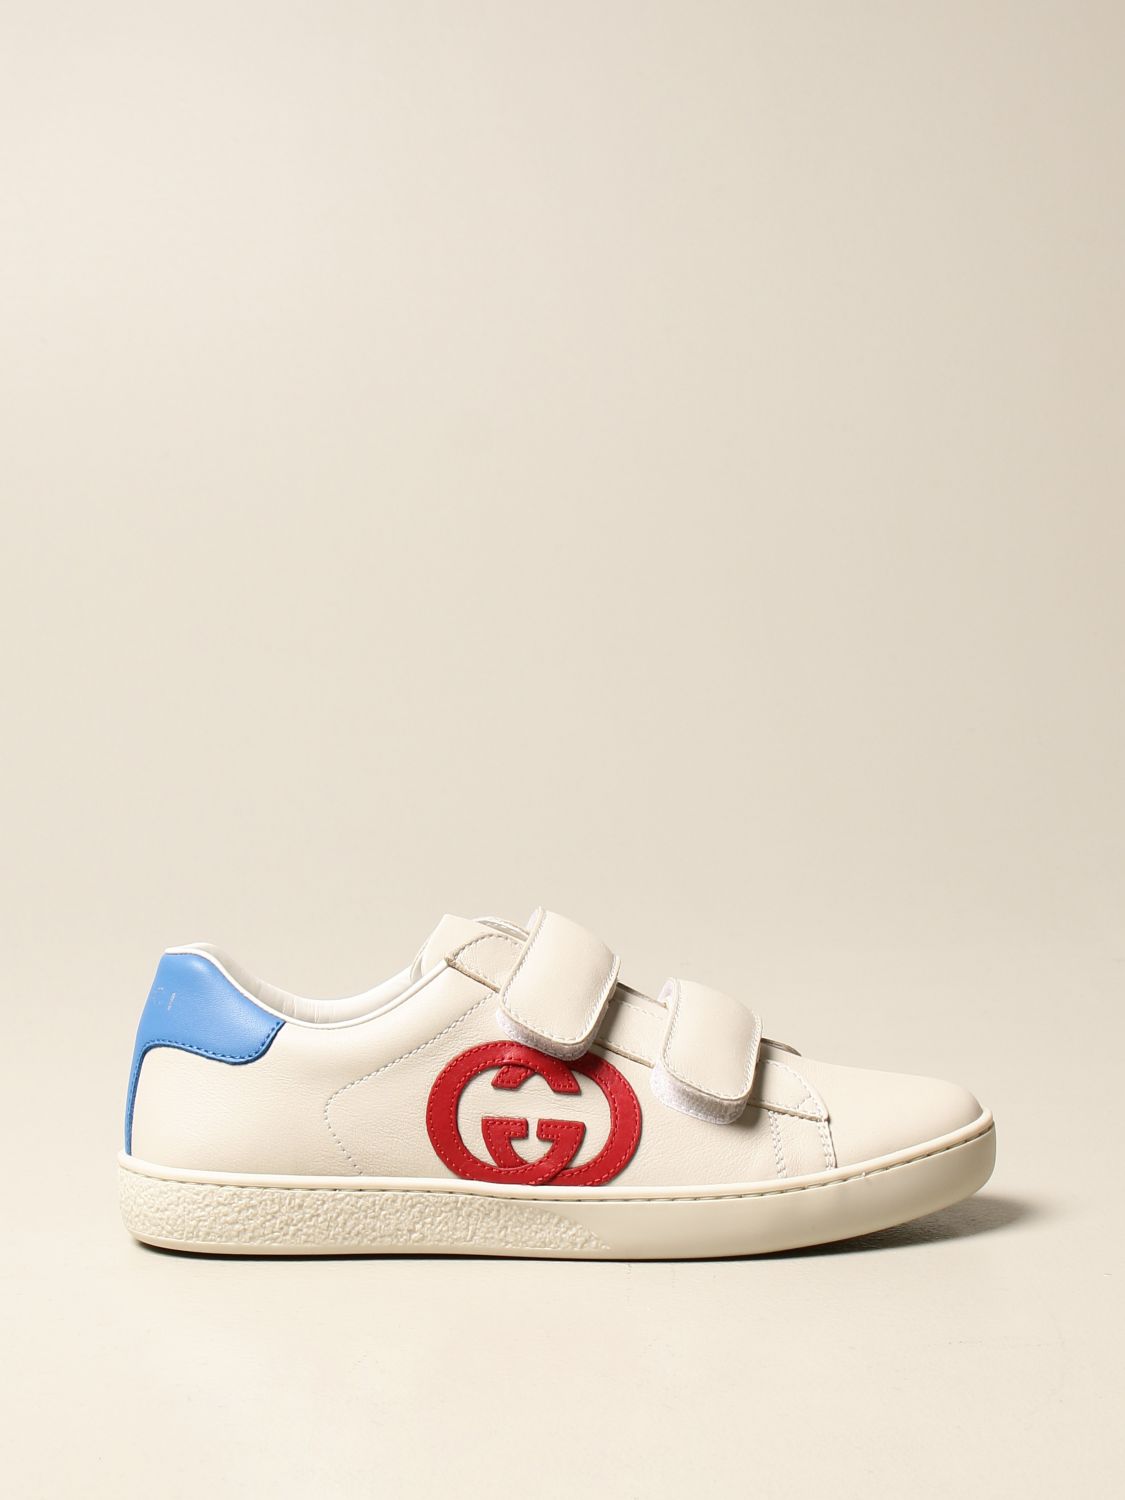 gucci sneakers for less